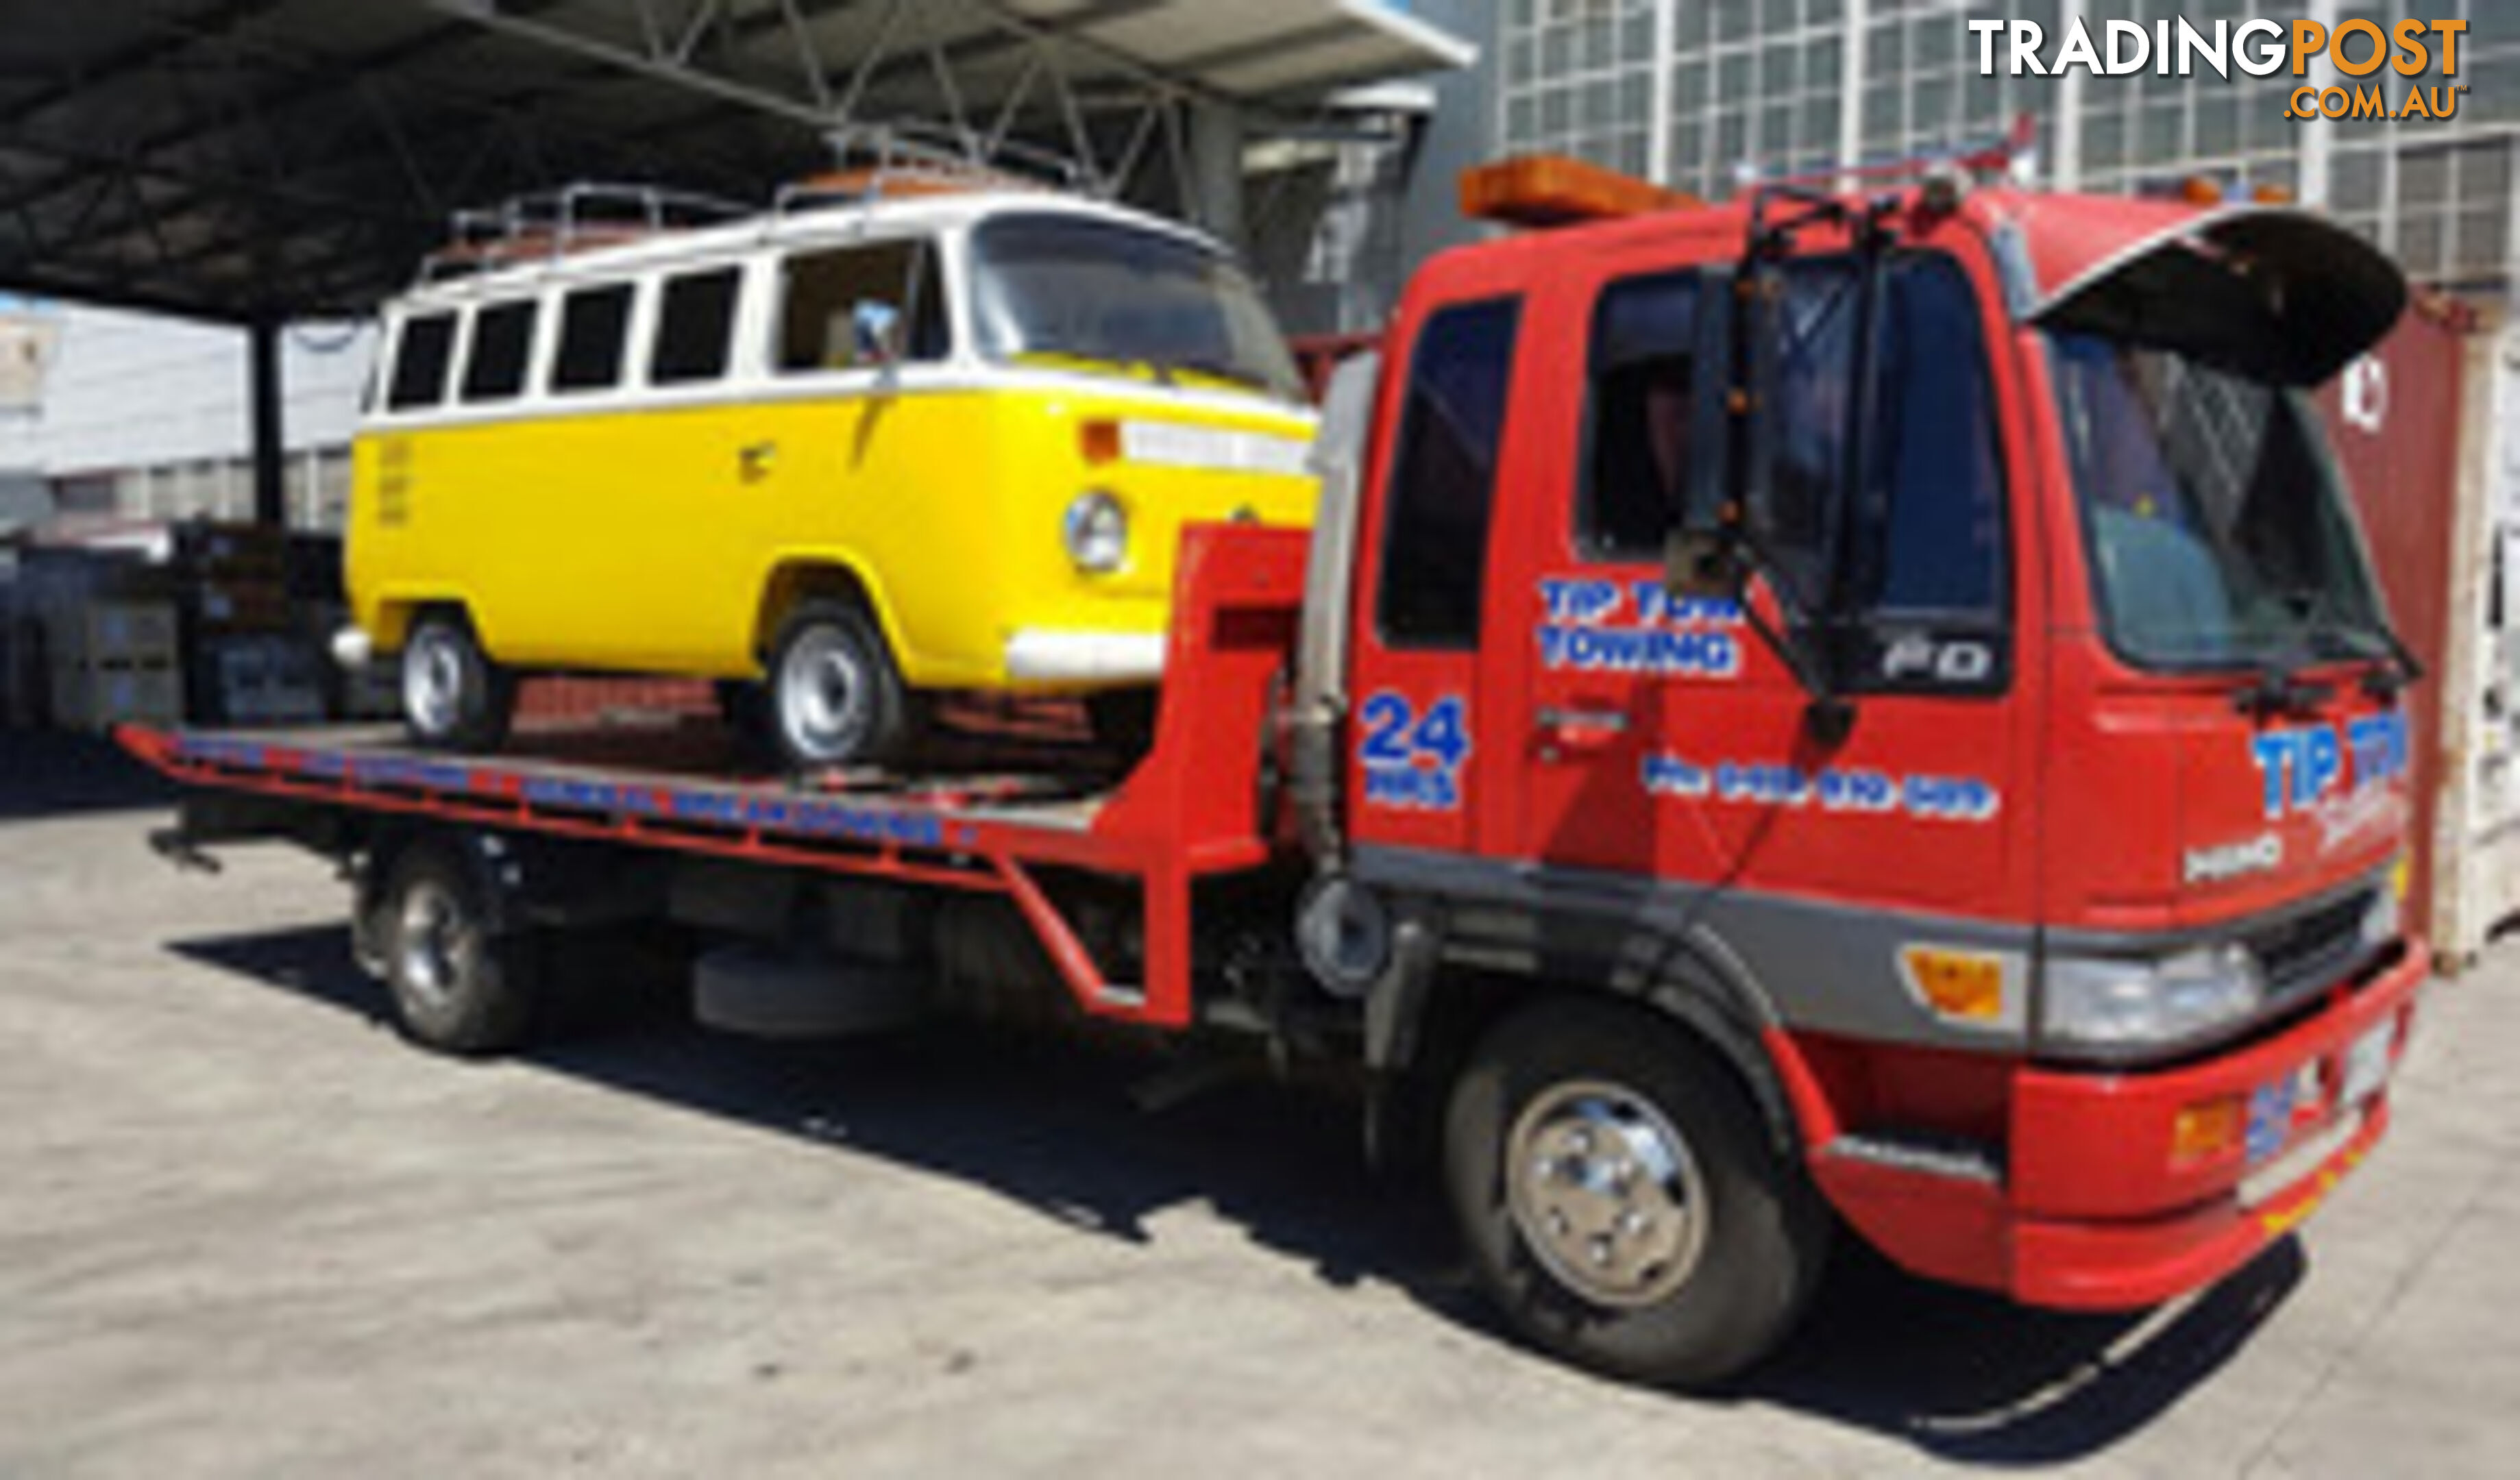 Towing Services, Beverley, SA